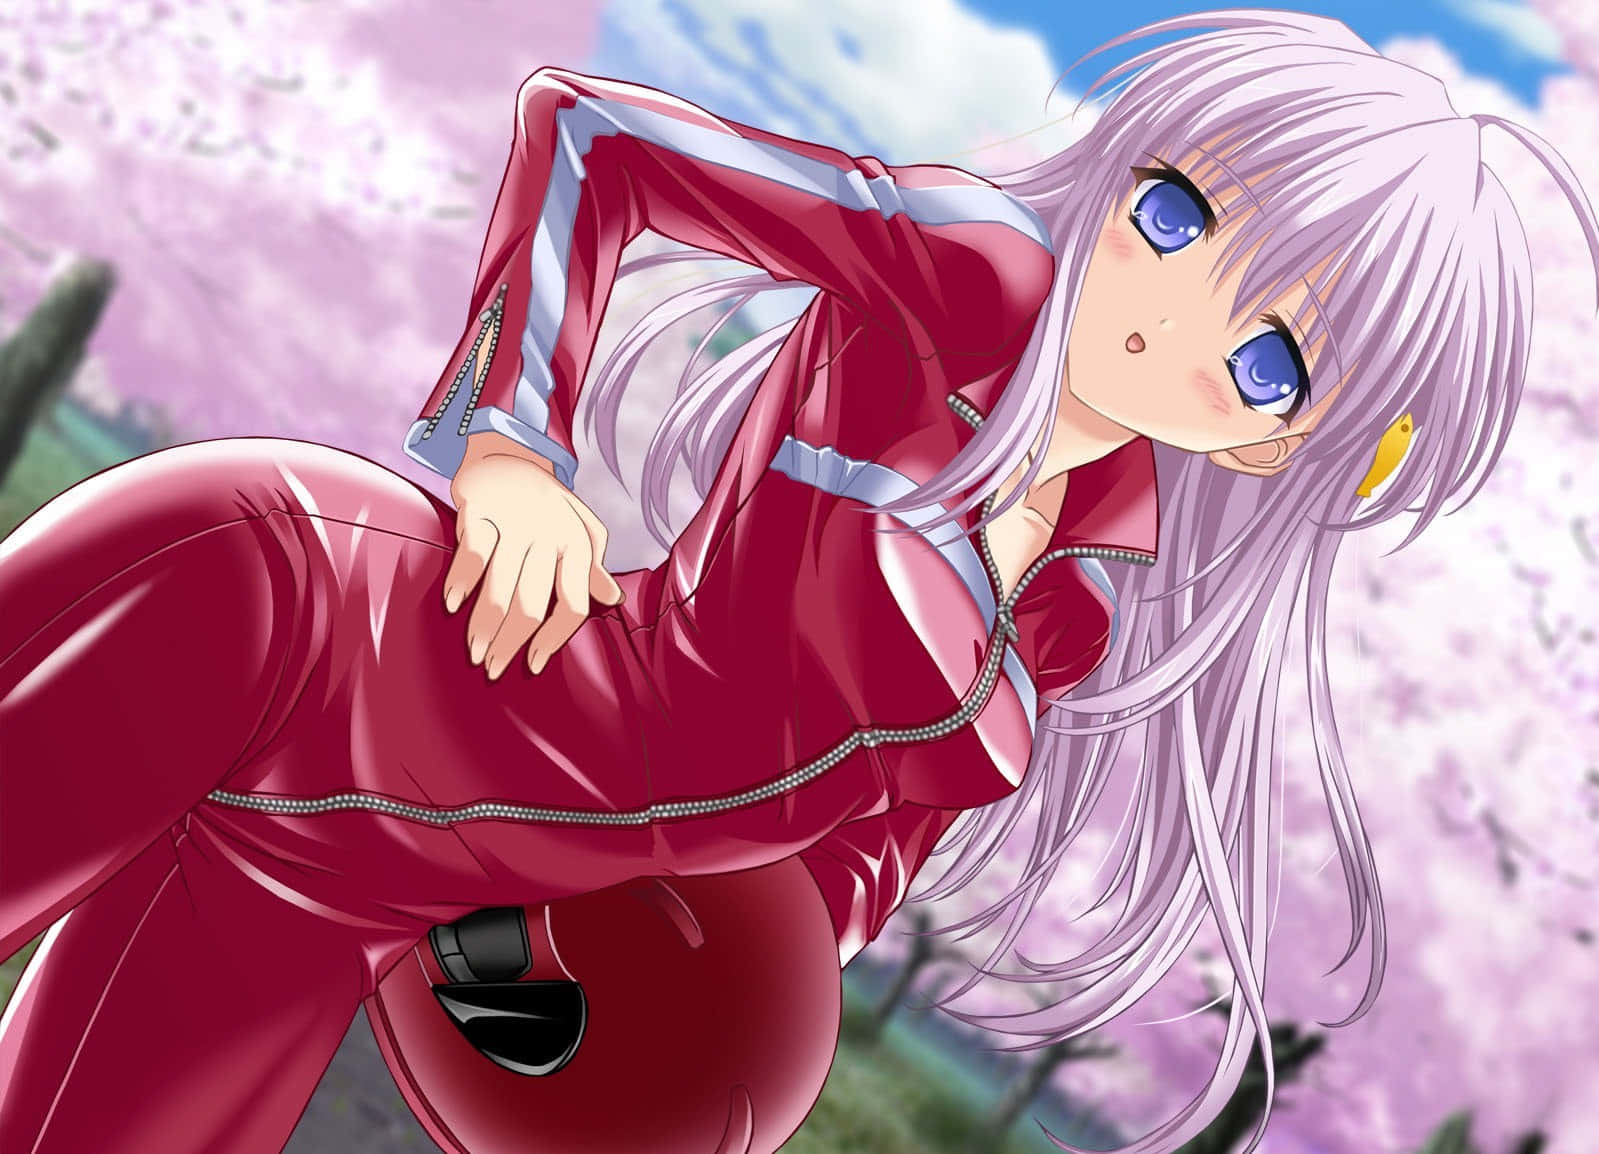 Tomoyo Sakagami, A Silver-haired Beauty From The Visual Novel, Clannad. Wallpaper